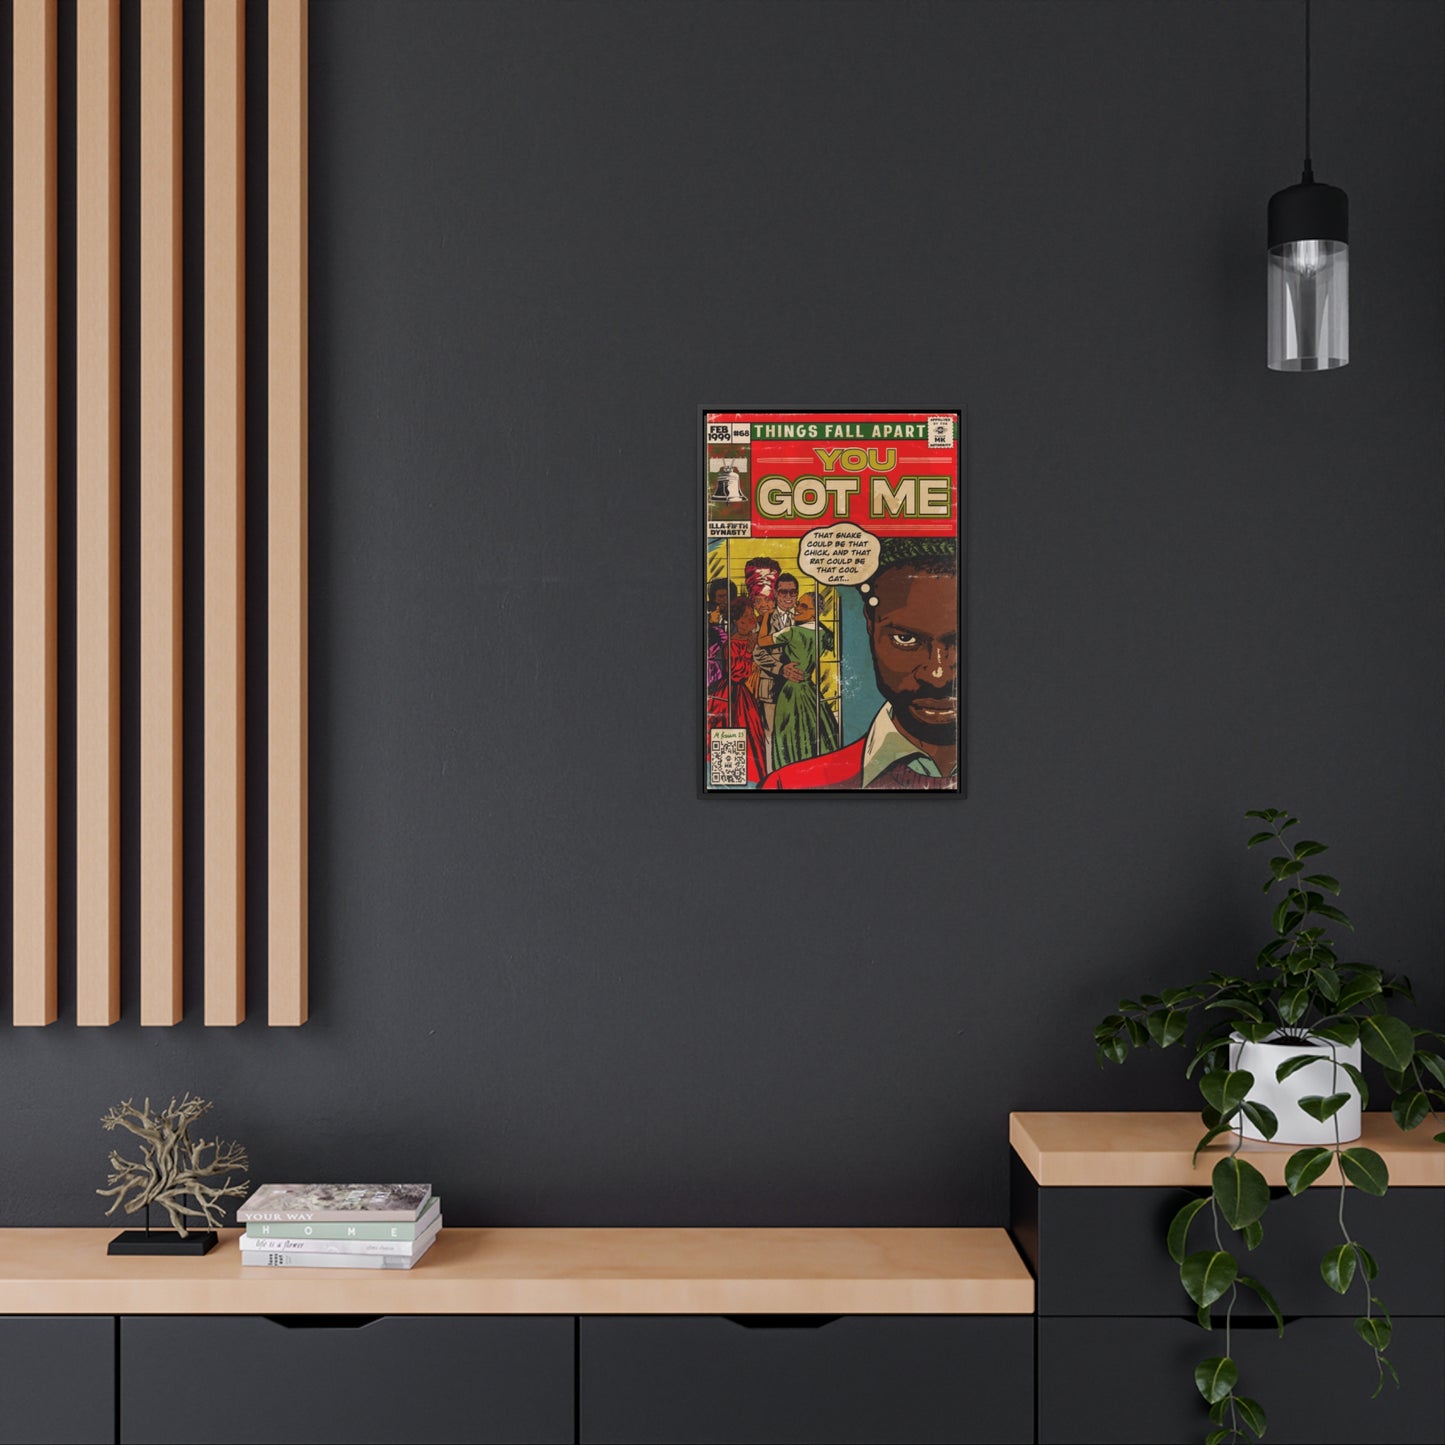 The Roots - You Got Me featuring Erykah Badu & Eve - Gallery Canvas Wraps, Vertical Frame